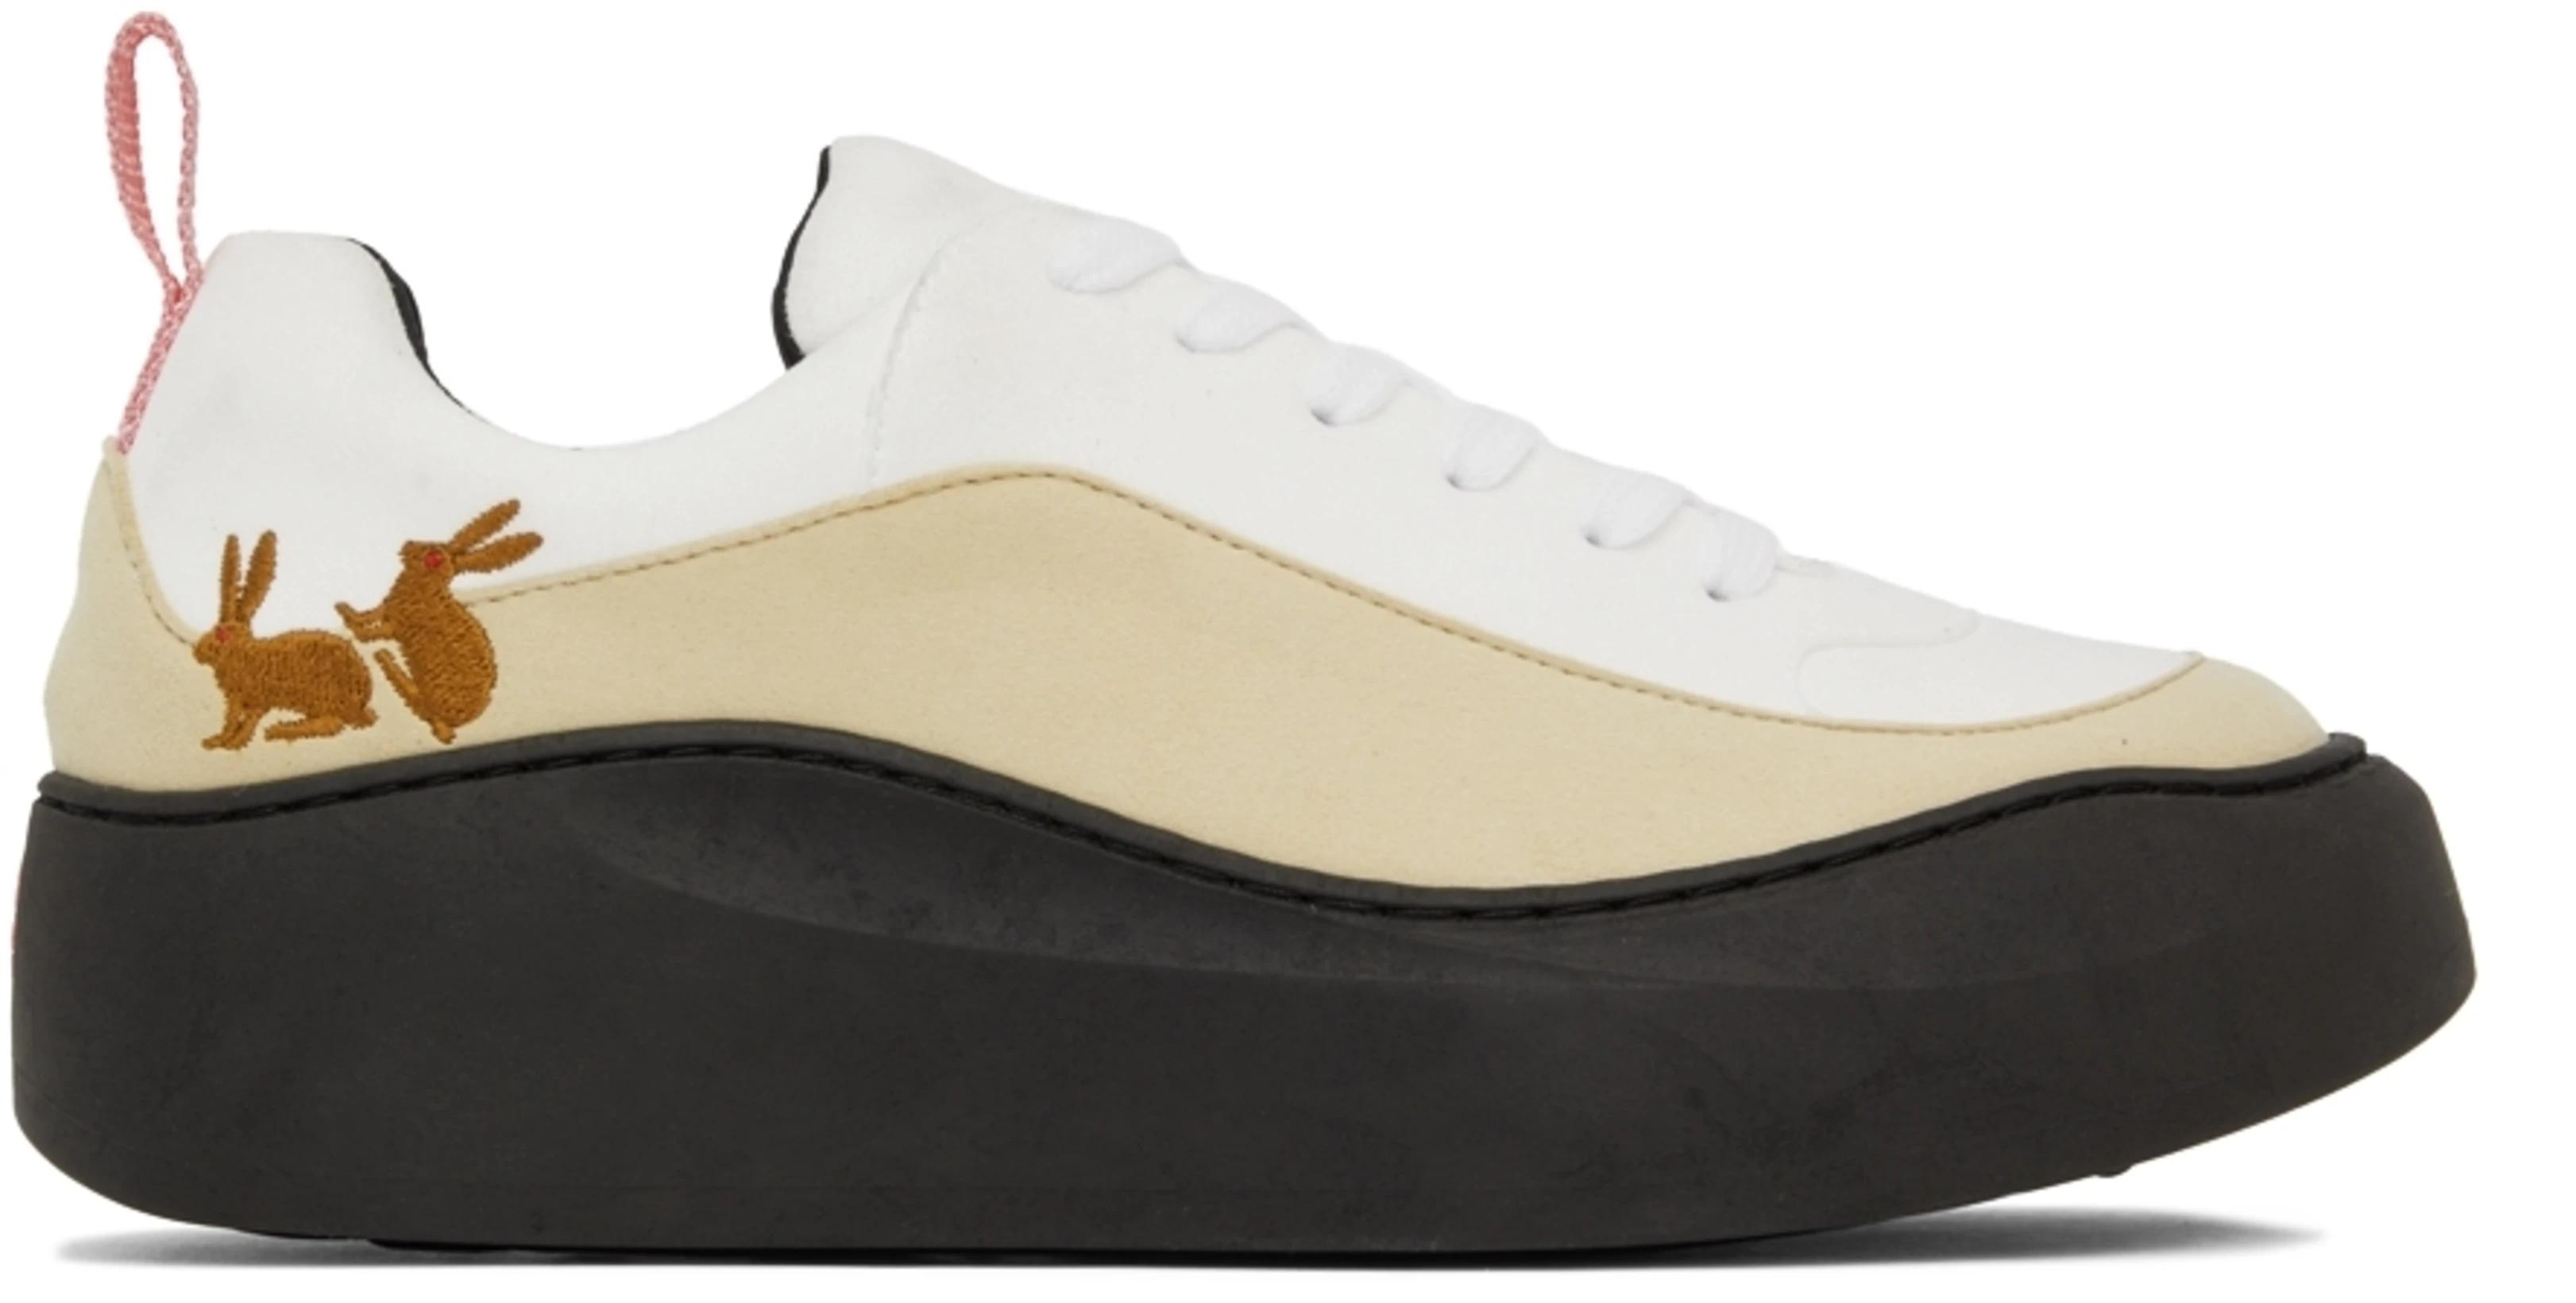 White & Beige Classic Sneakers by CARNE BOLLENTE